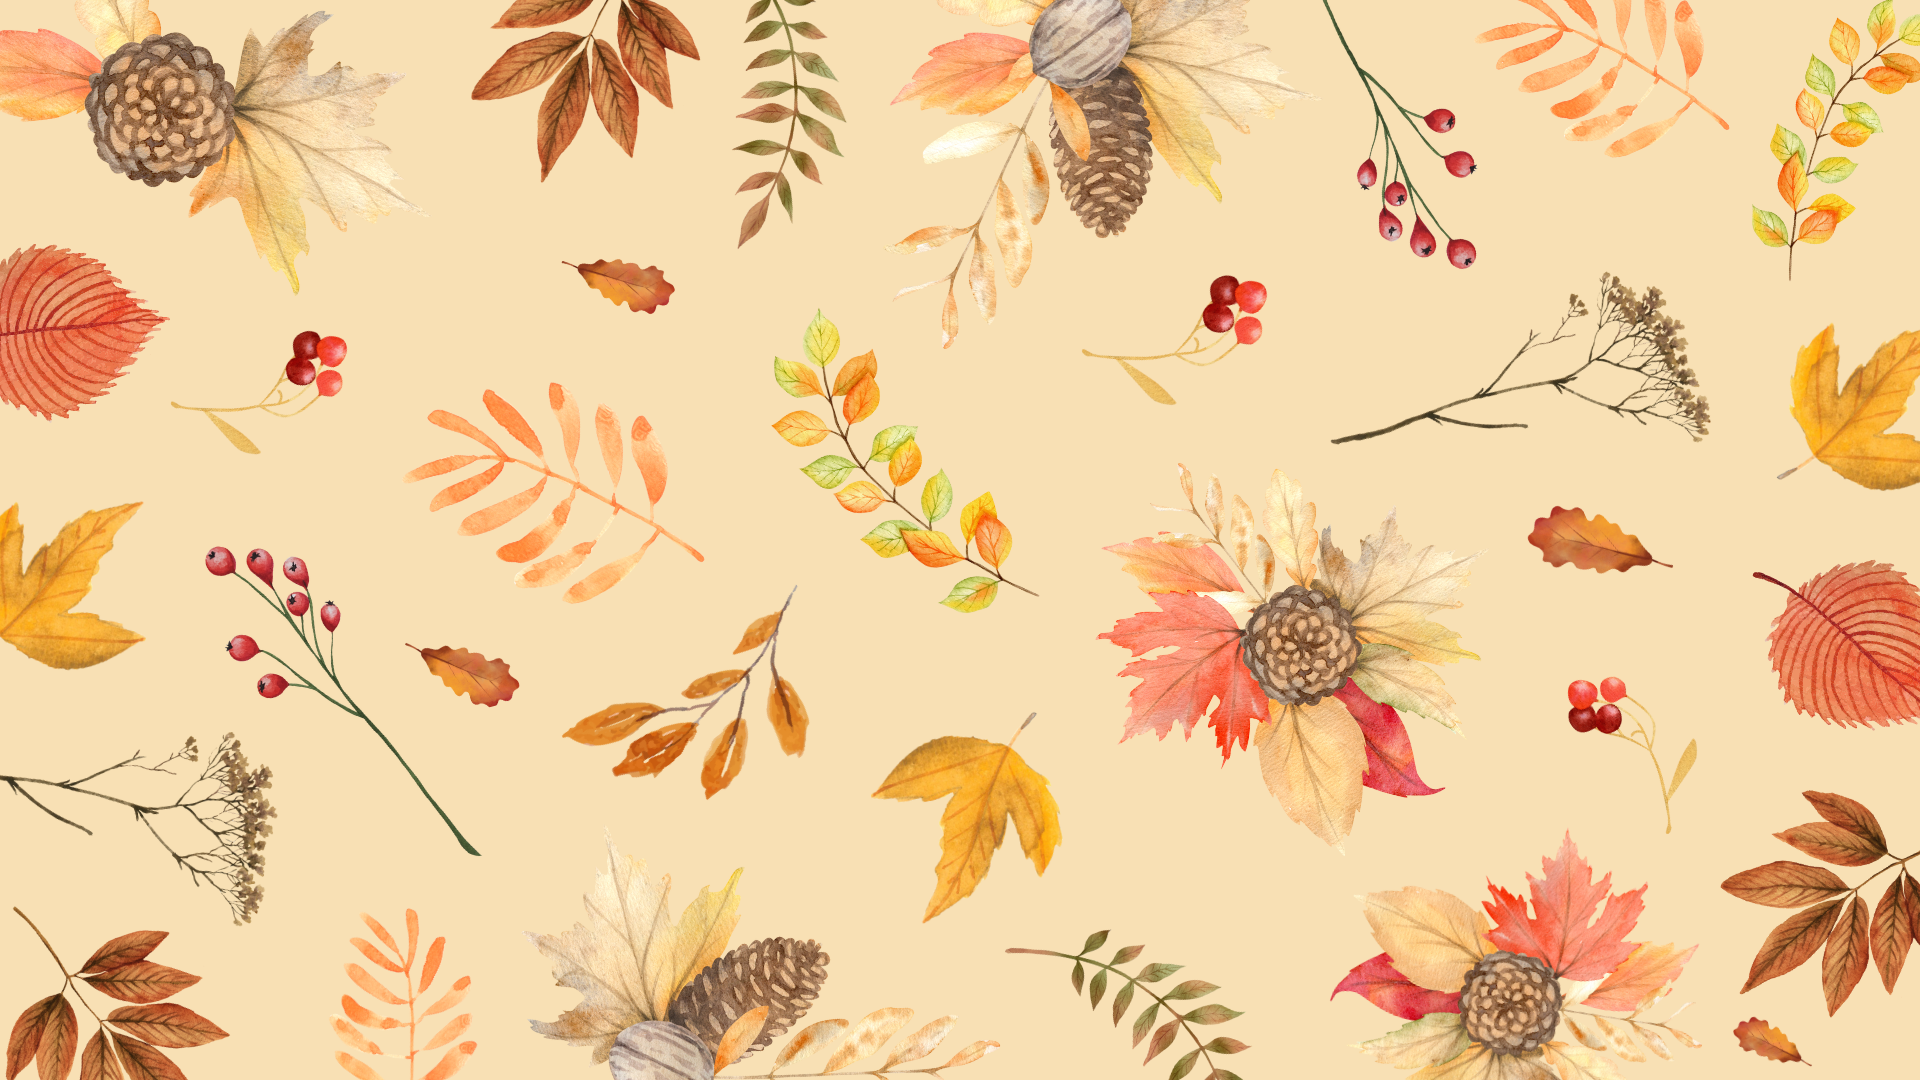 A collection of free aesthetic fall wallpapers available for iPhone and desktop. These wallpapers capture the beauty of autumn with vibrant foliage, cozy scenes, and rustic landscapes. Download and personalize your devices with these stunning fall-themed images.